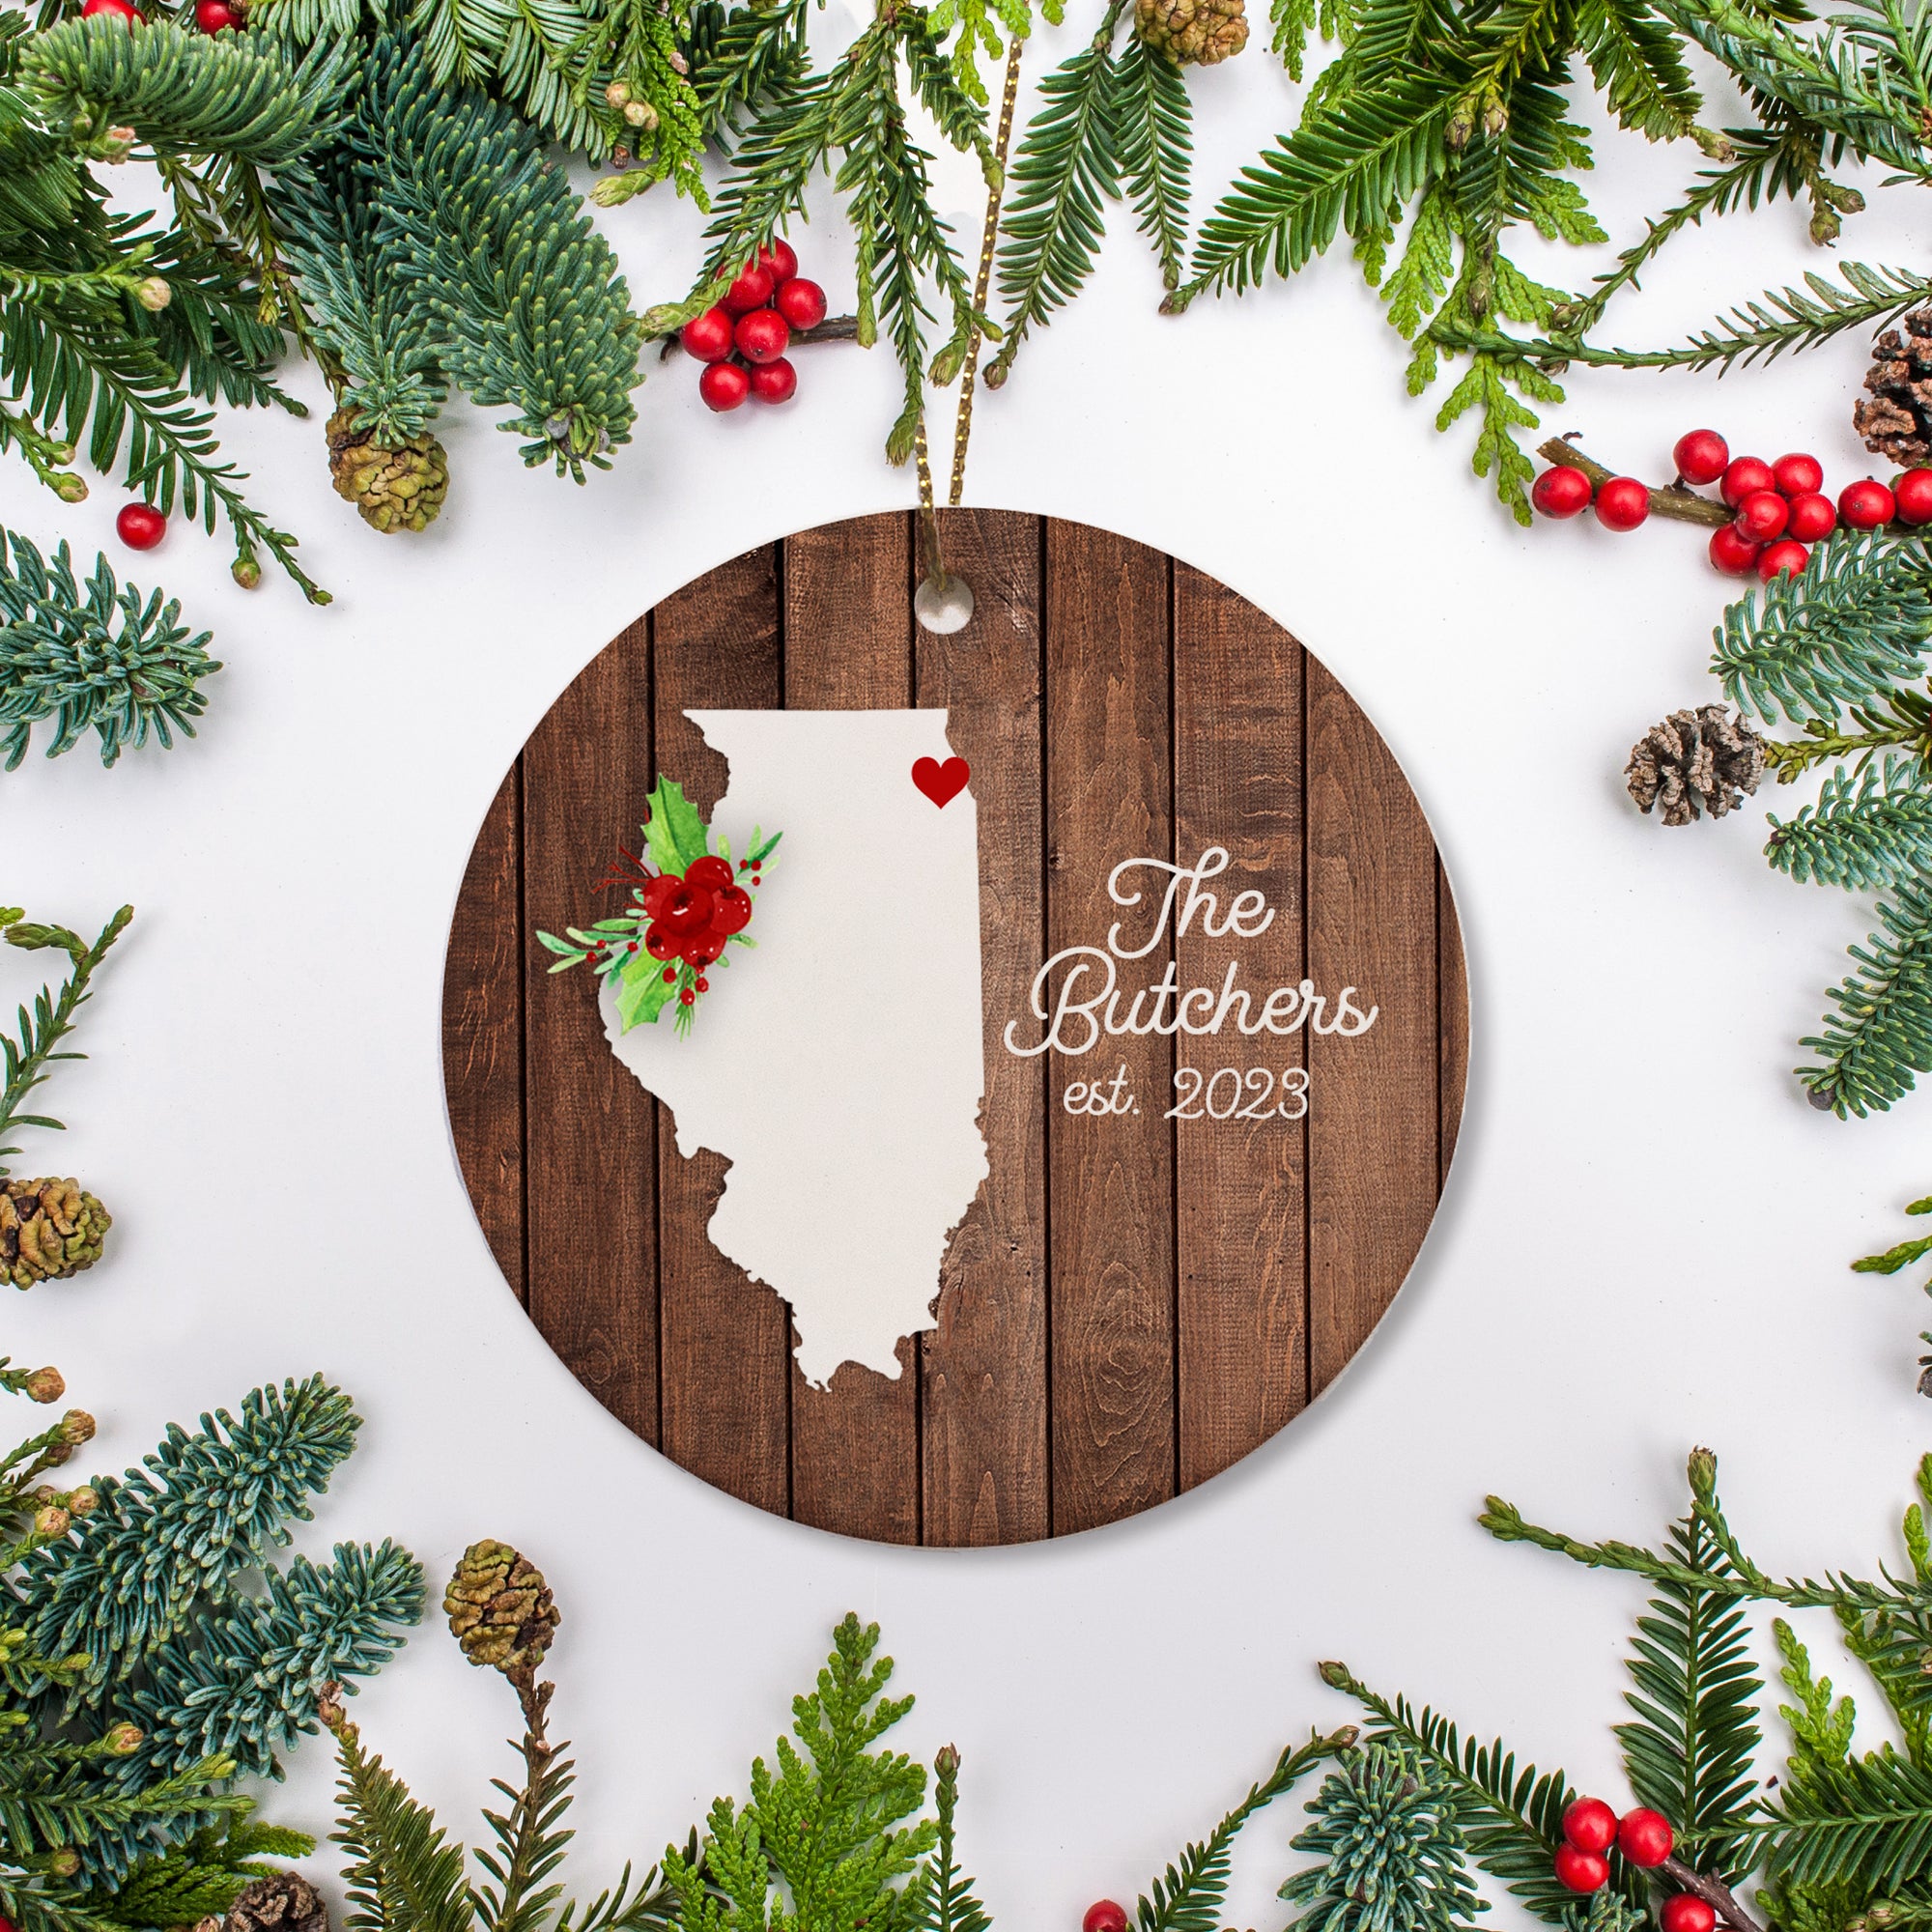 Illinois state christmas ornament. Personalized with your name, city, and year. Ceramic keepsake ornament with a gold hanging string. Great for a college student, new home owners, just moved, or vacation memory